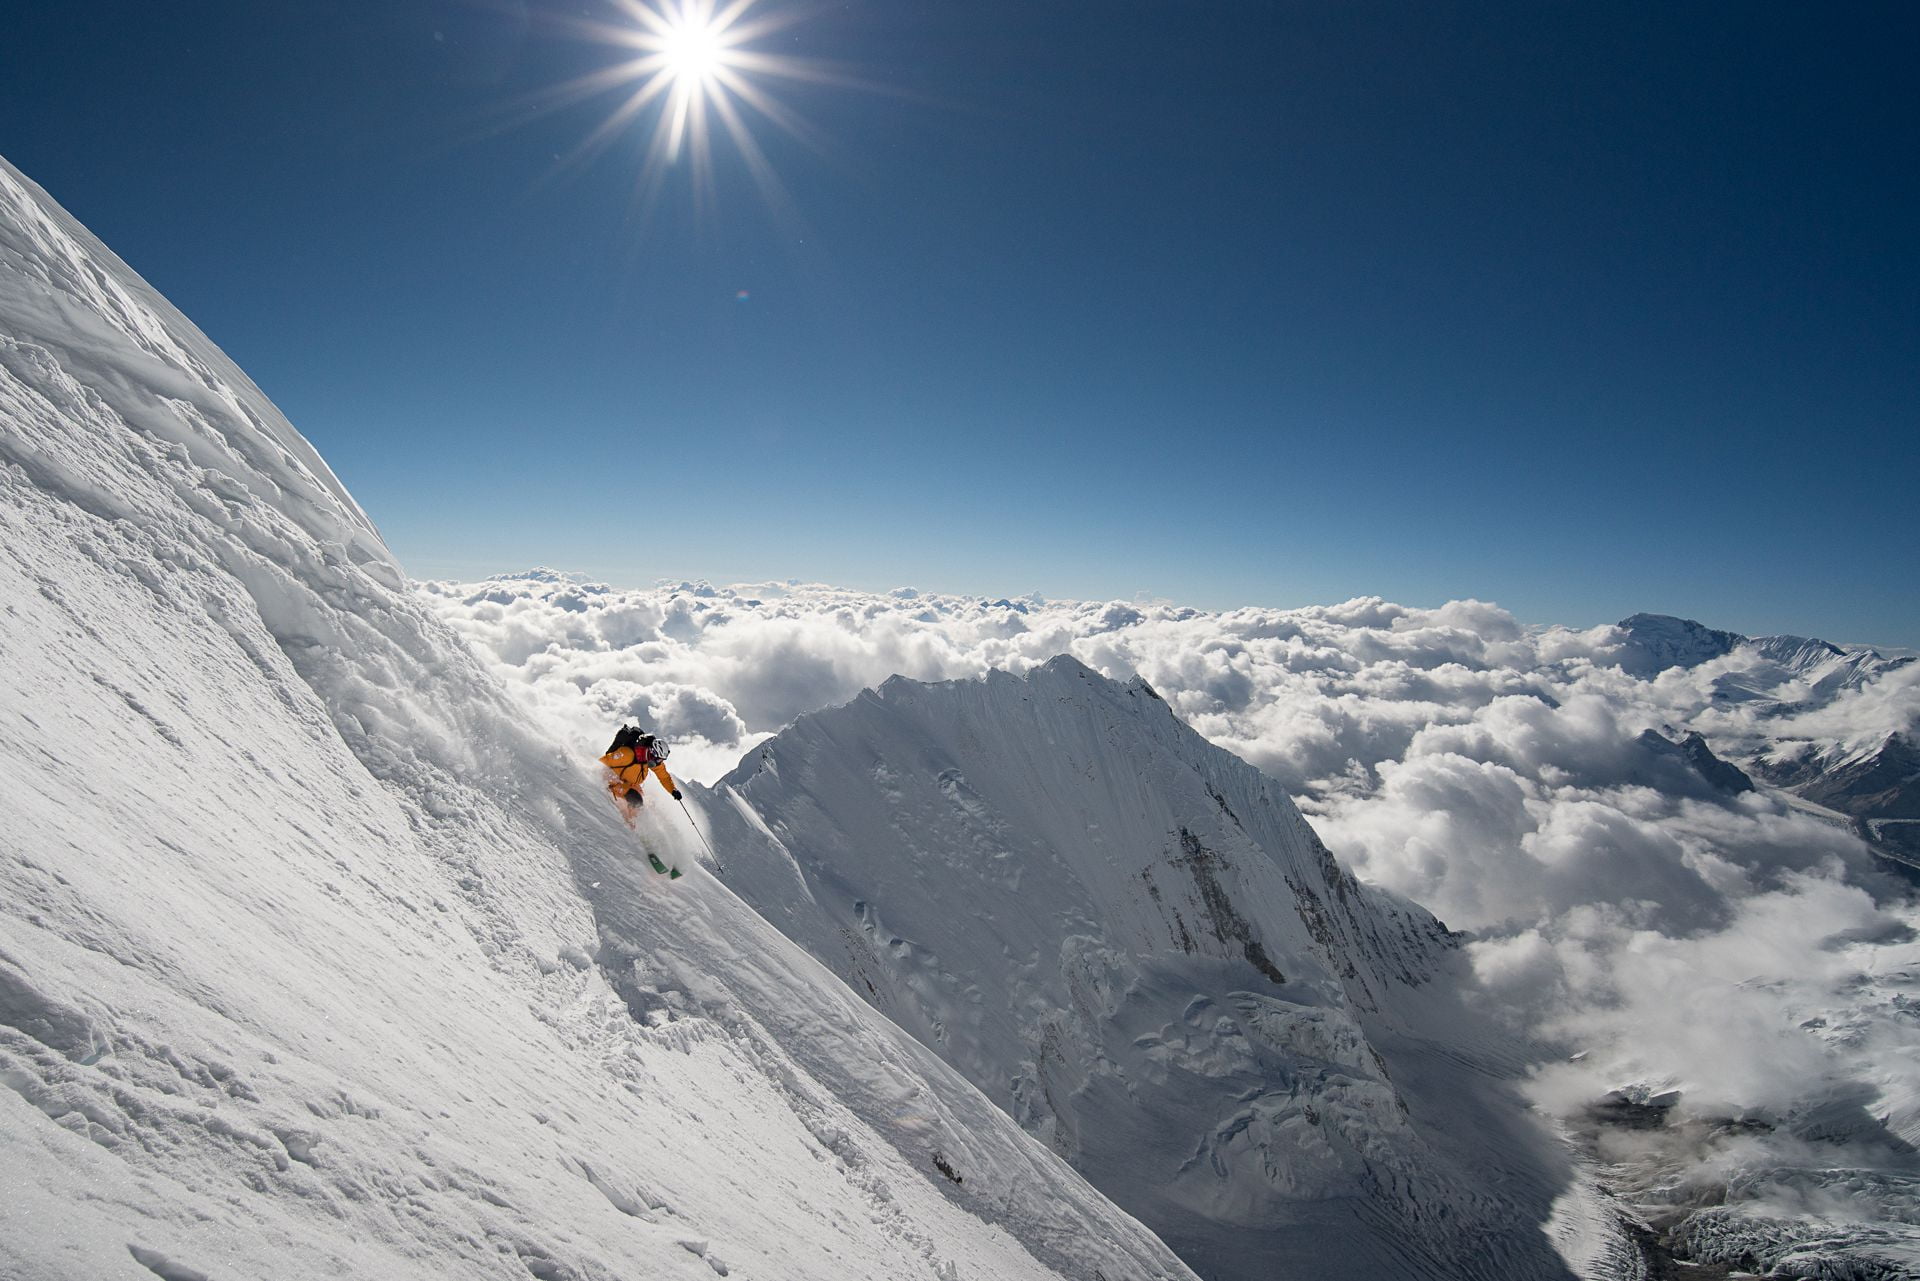 Never-Seen Images from the First Ski Descent of Lhotse